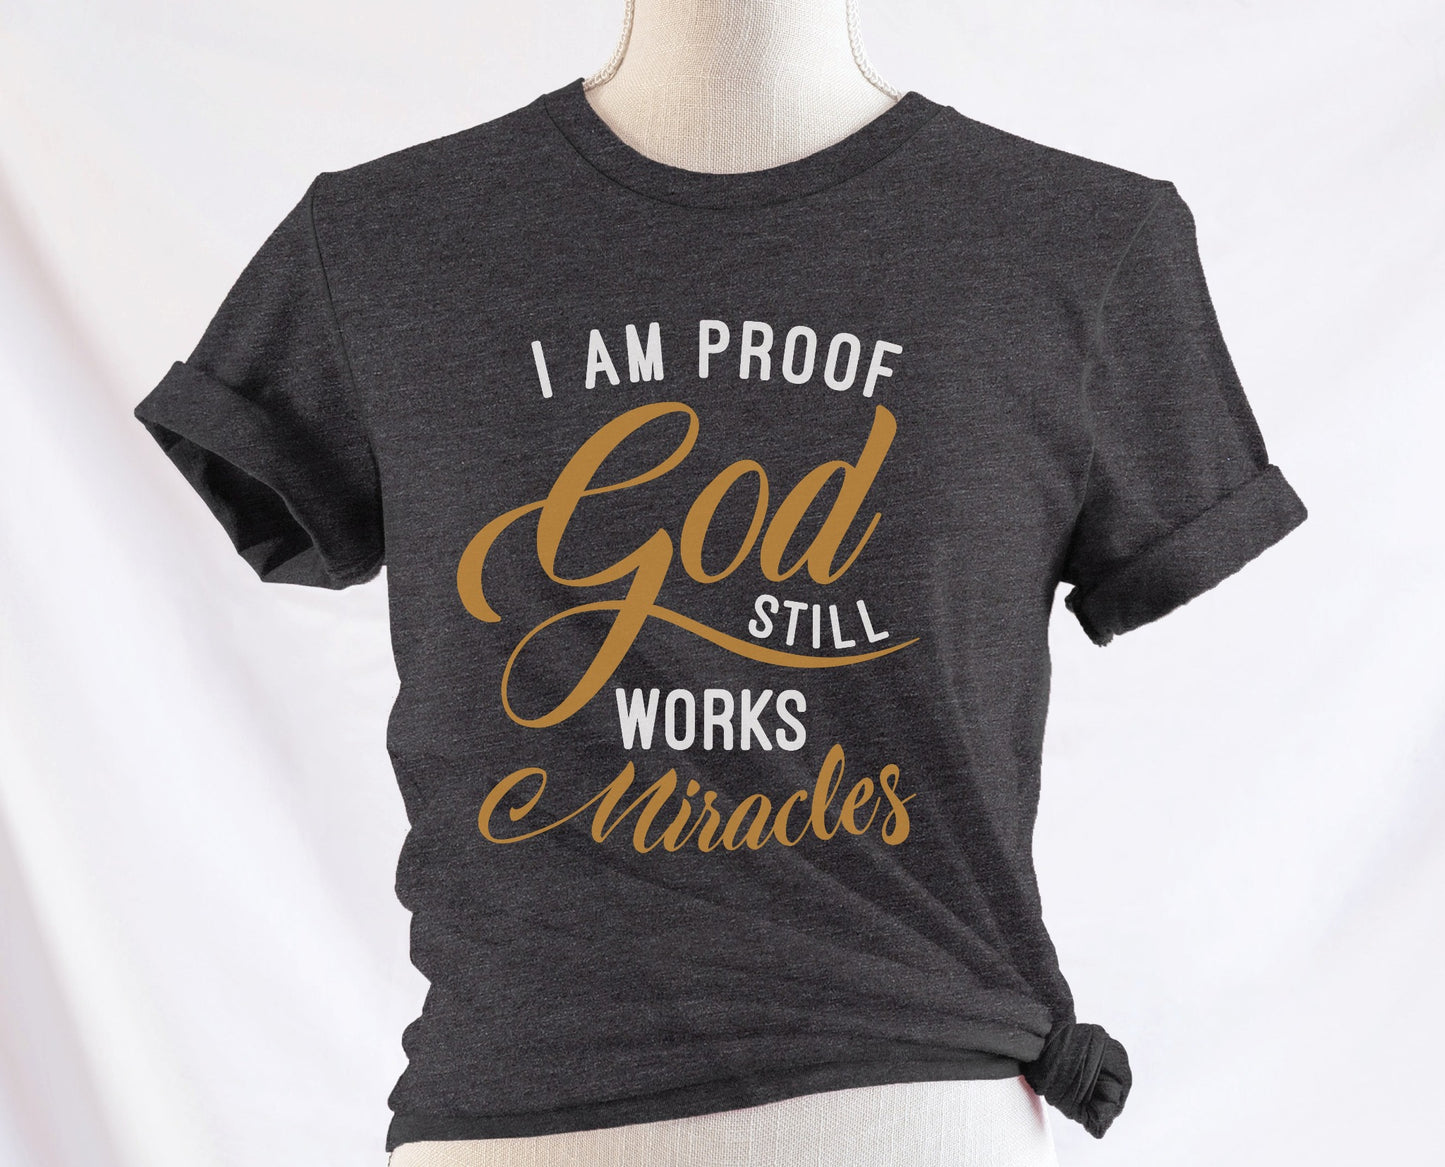 I am proof God still works miracles Christian aesthetic testimony design printed in white and gold on soft heather dark gray unisex t-shirt for women